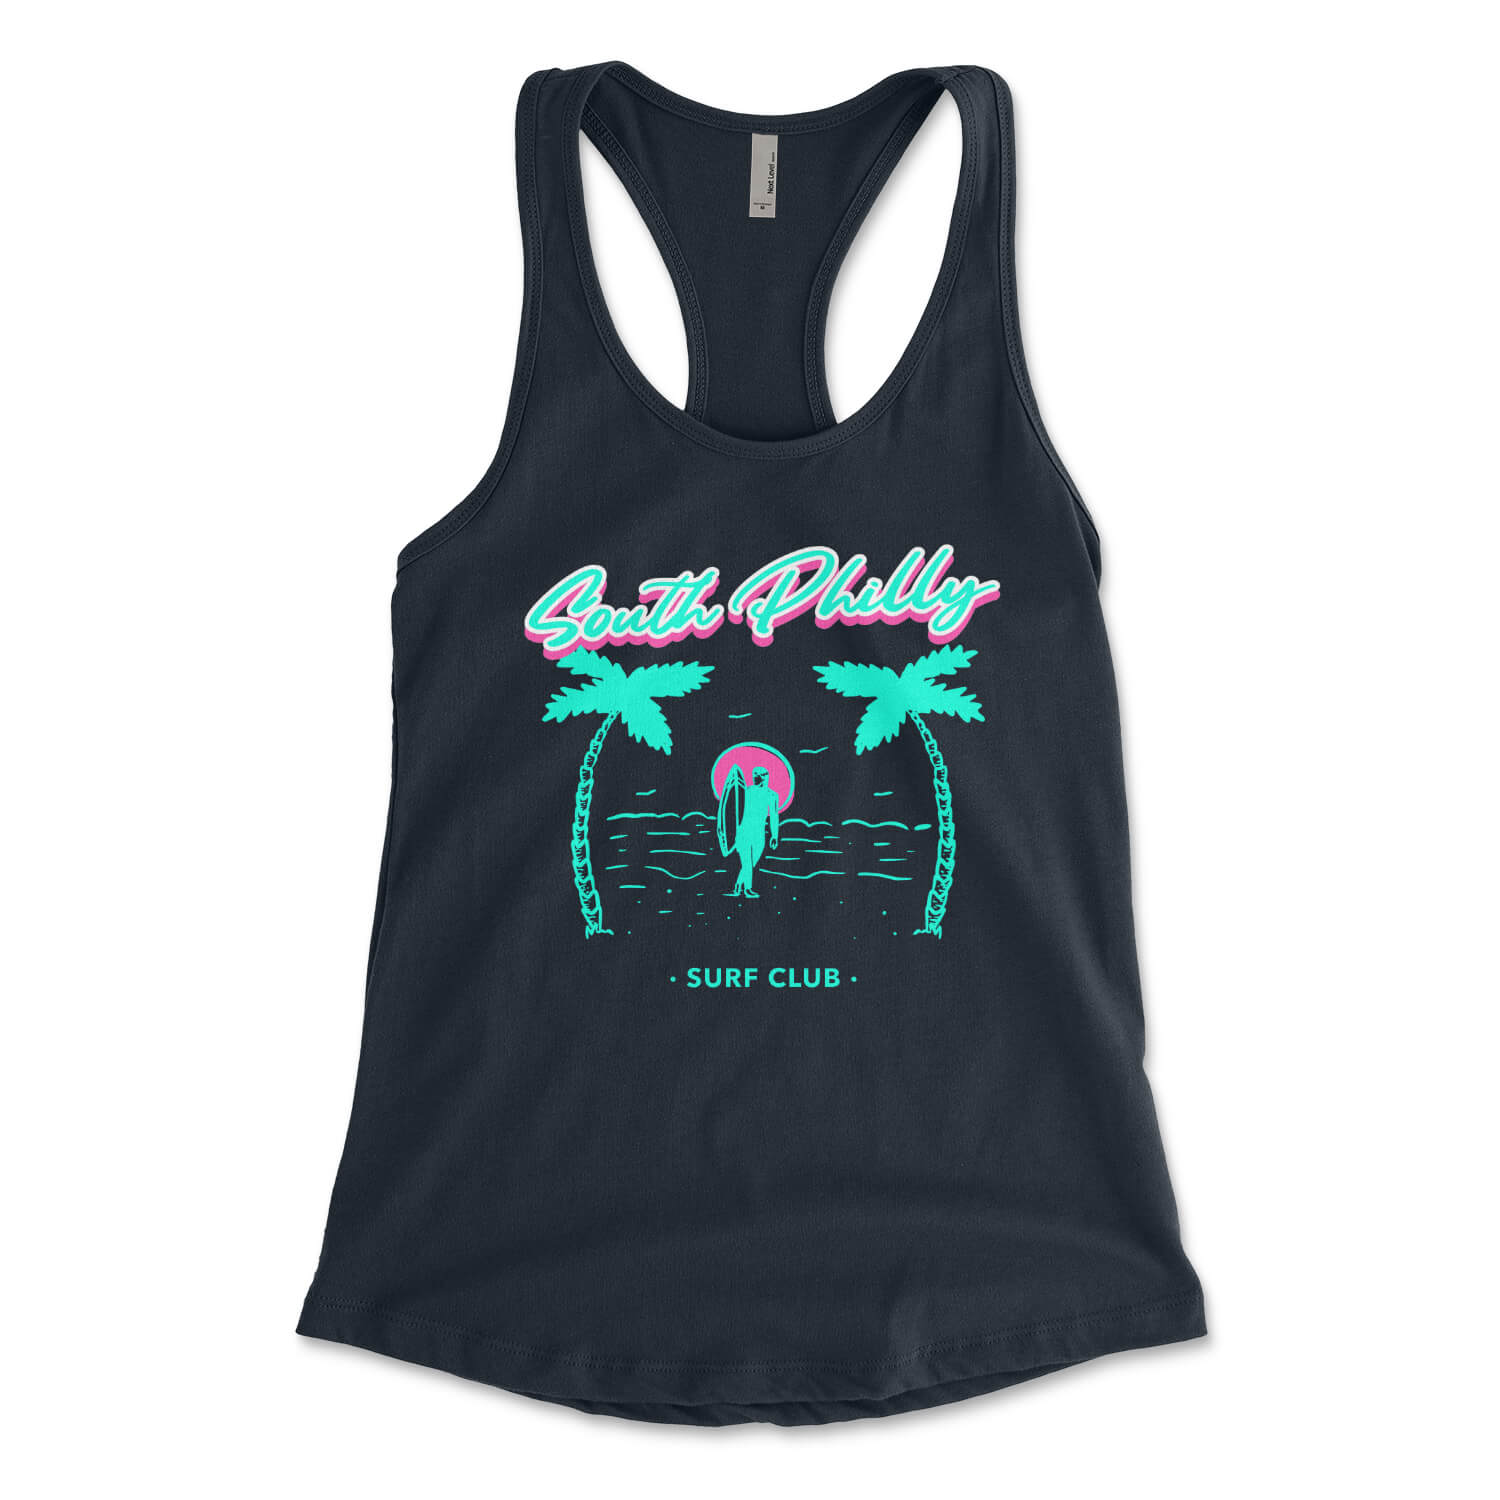 South Philly Suff Club funny womens midnight navy blue racerback tank top from Phillygoat